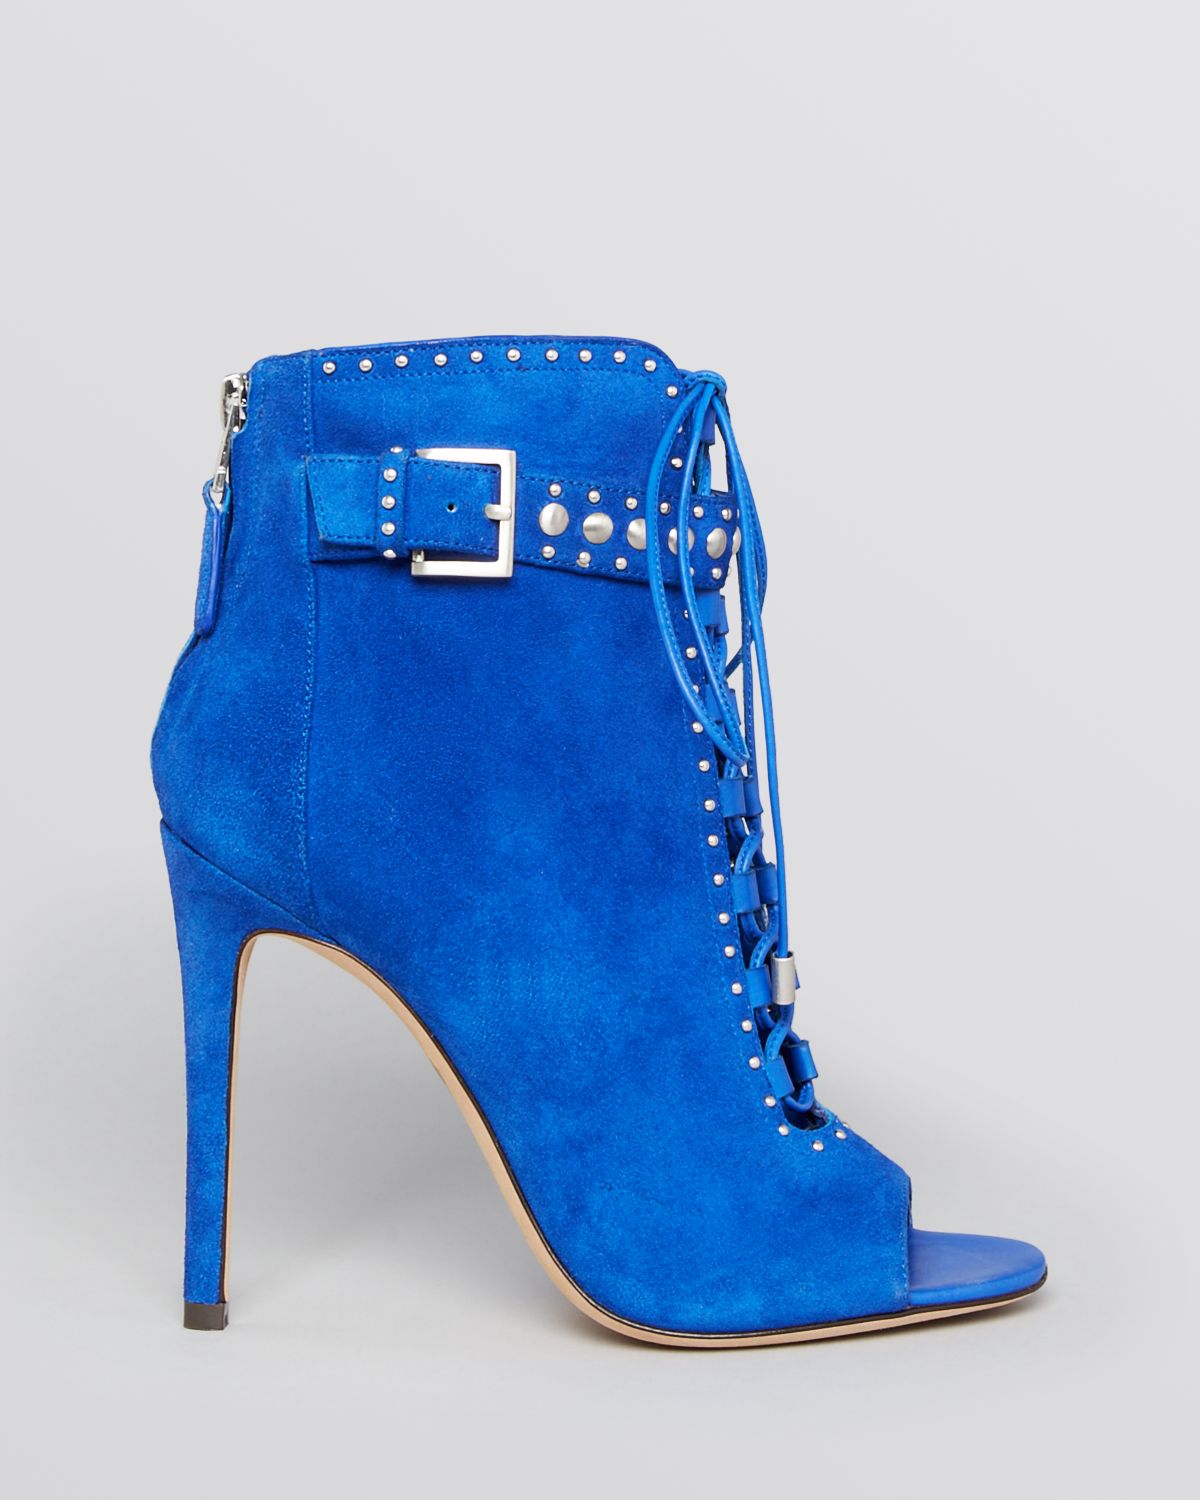 Lyst - B Brian Atwood Open Toe Lace Up Booties Lamotte High Heel in Blue